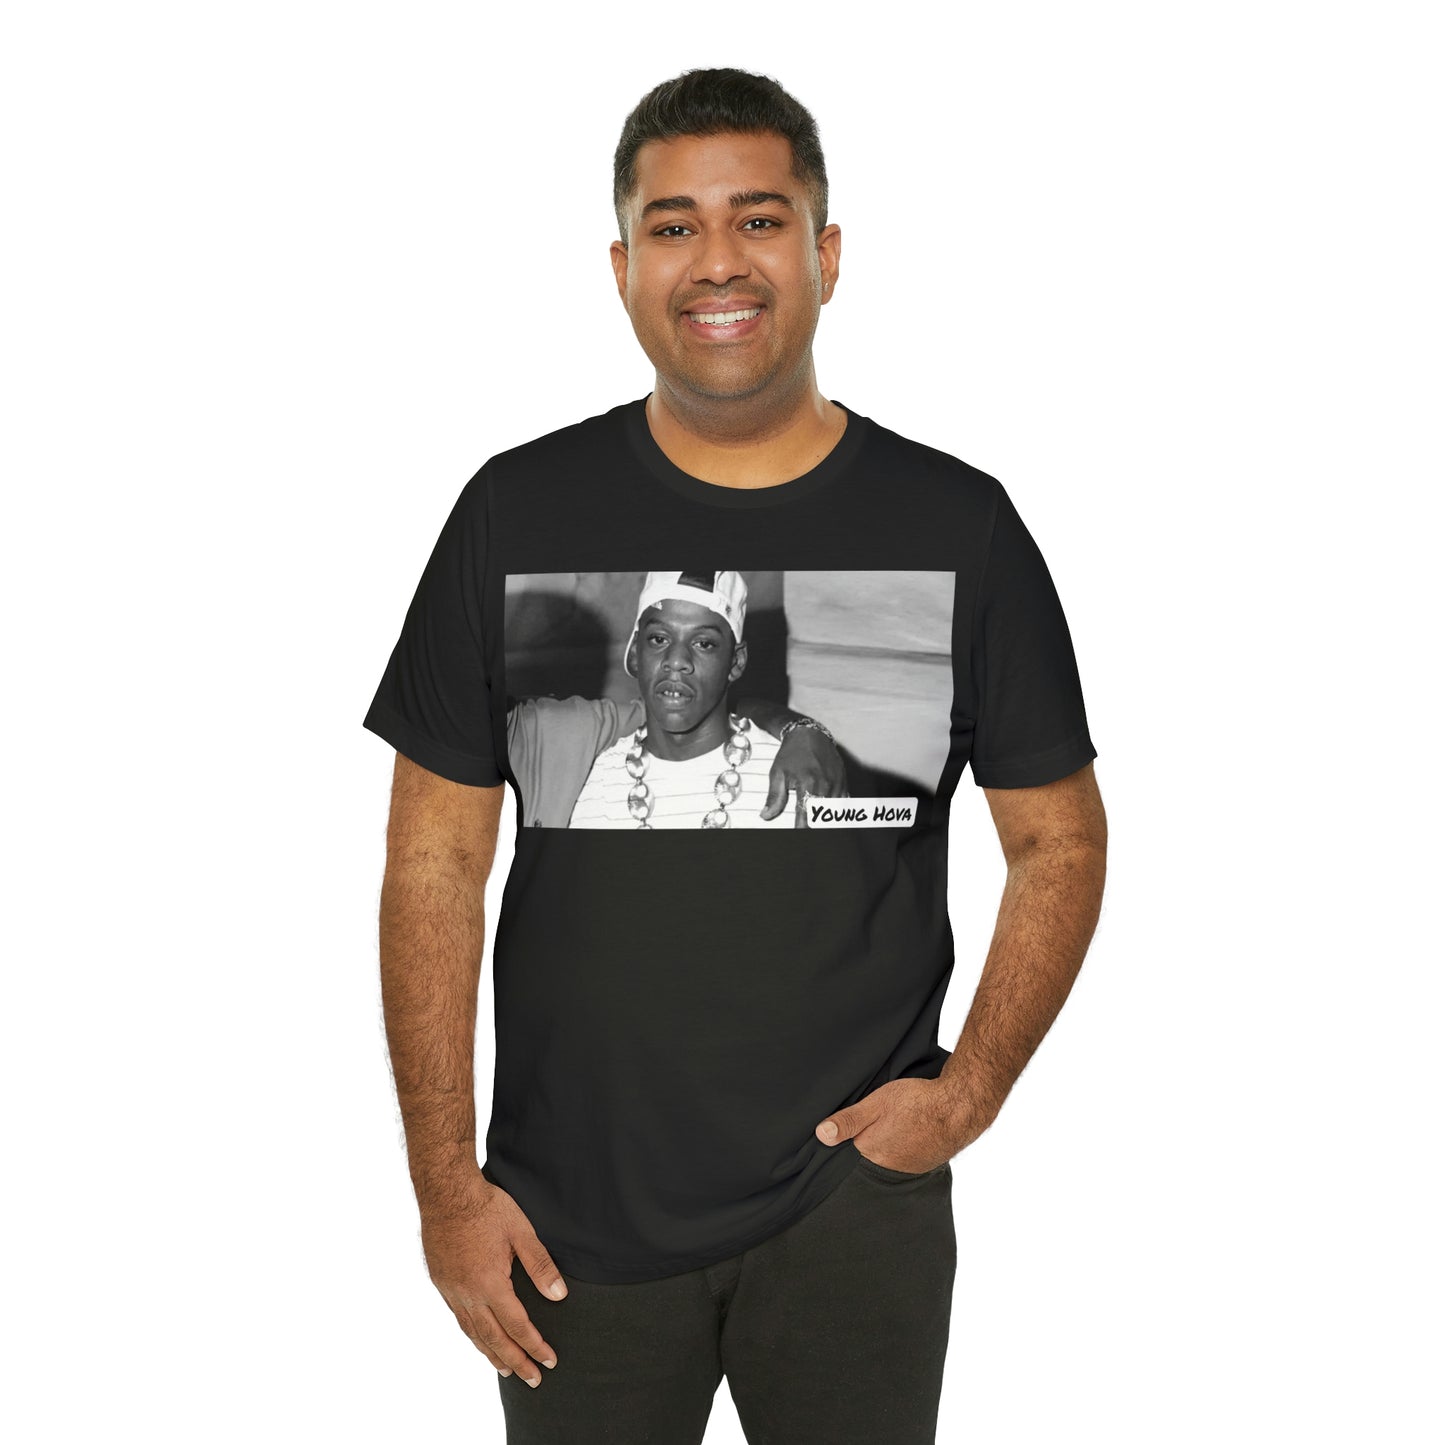 "Young Hova" -  Short Sleeve